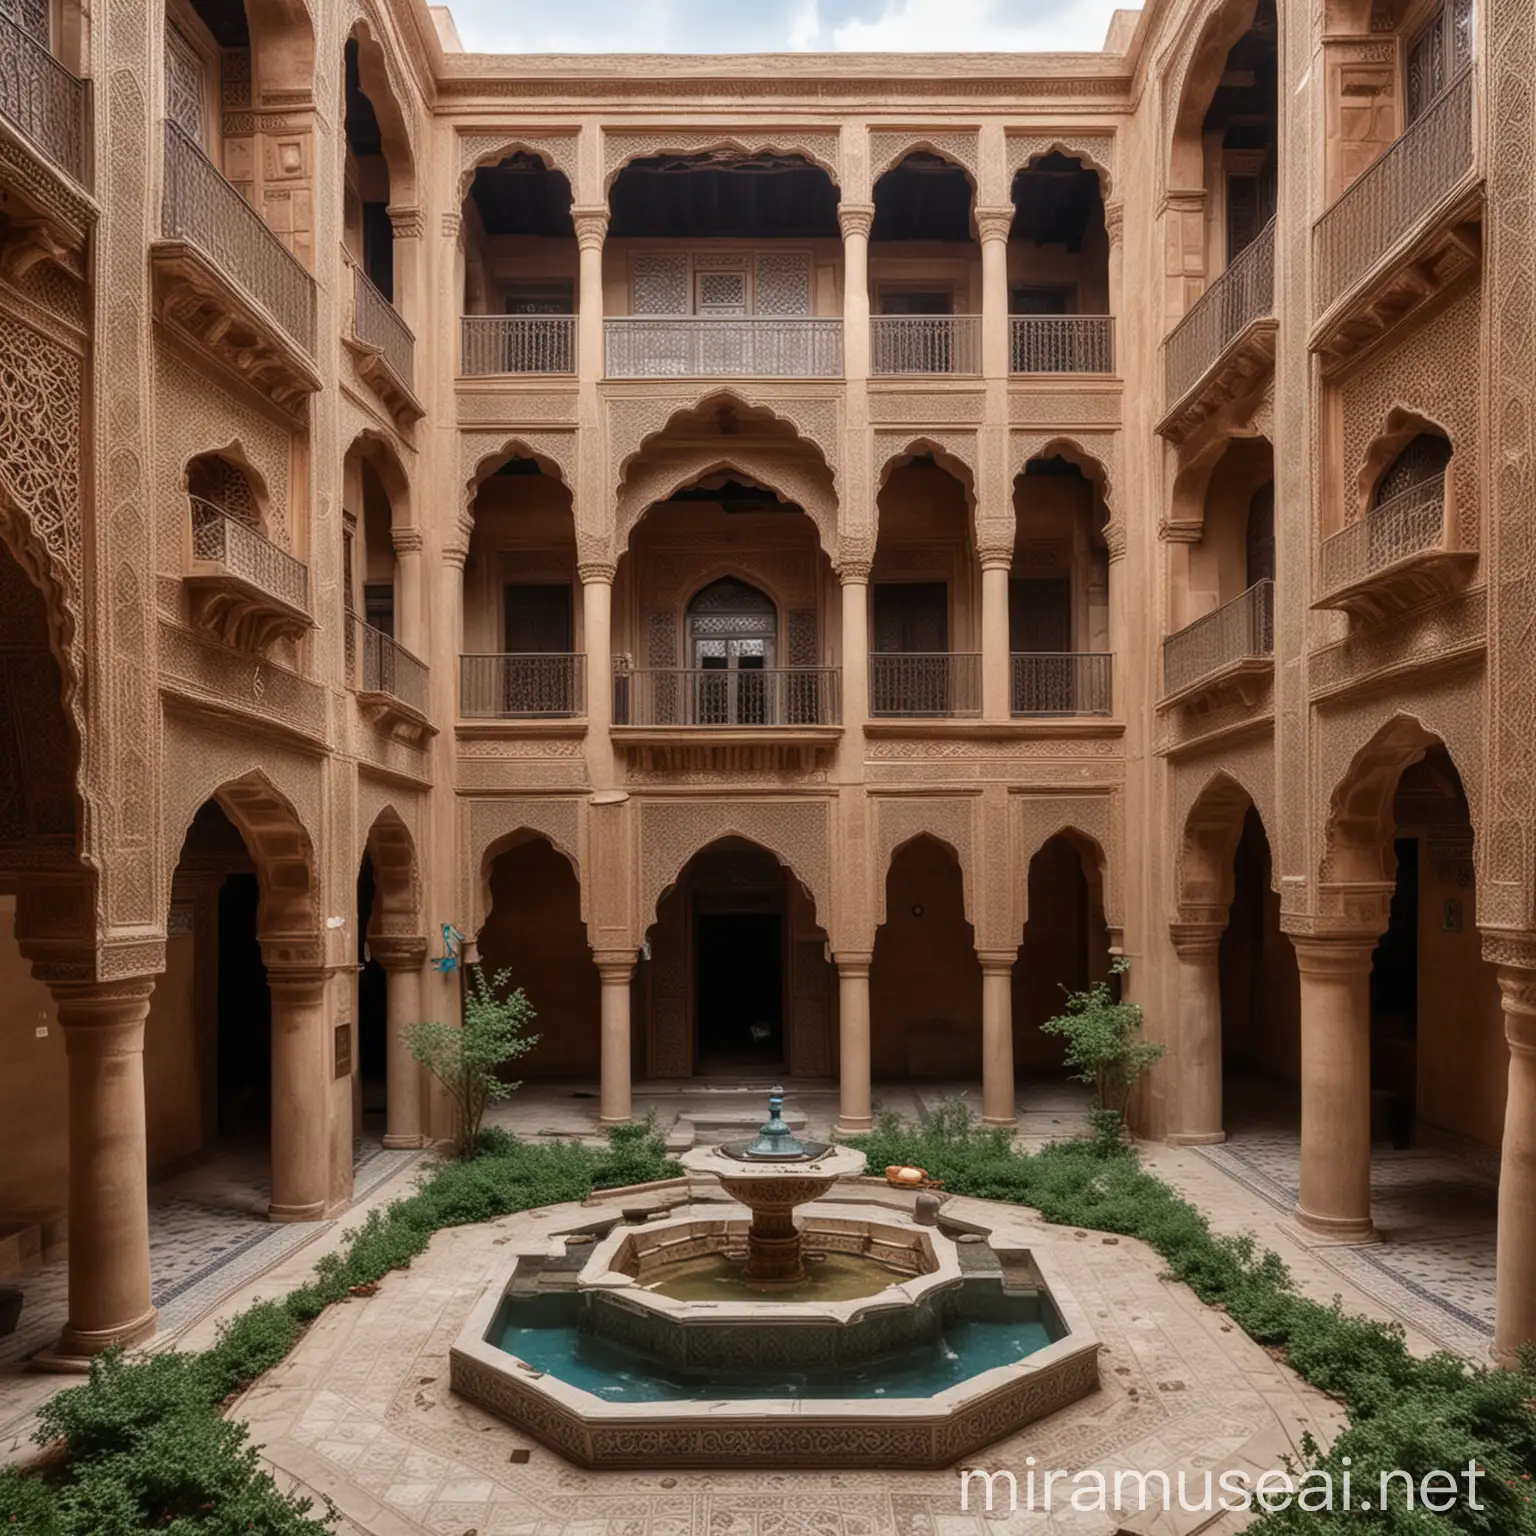 Traditional Iranian and Moroccan Architecture TwoStory Courtyard Building